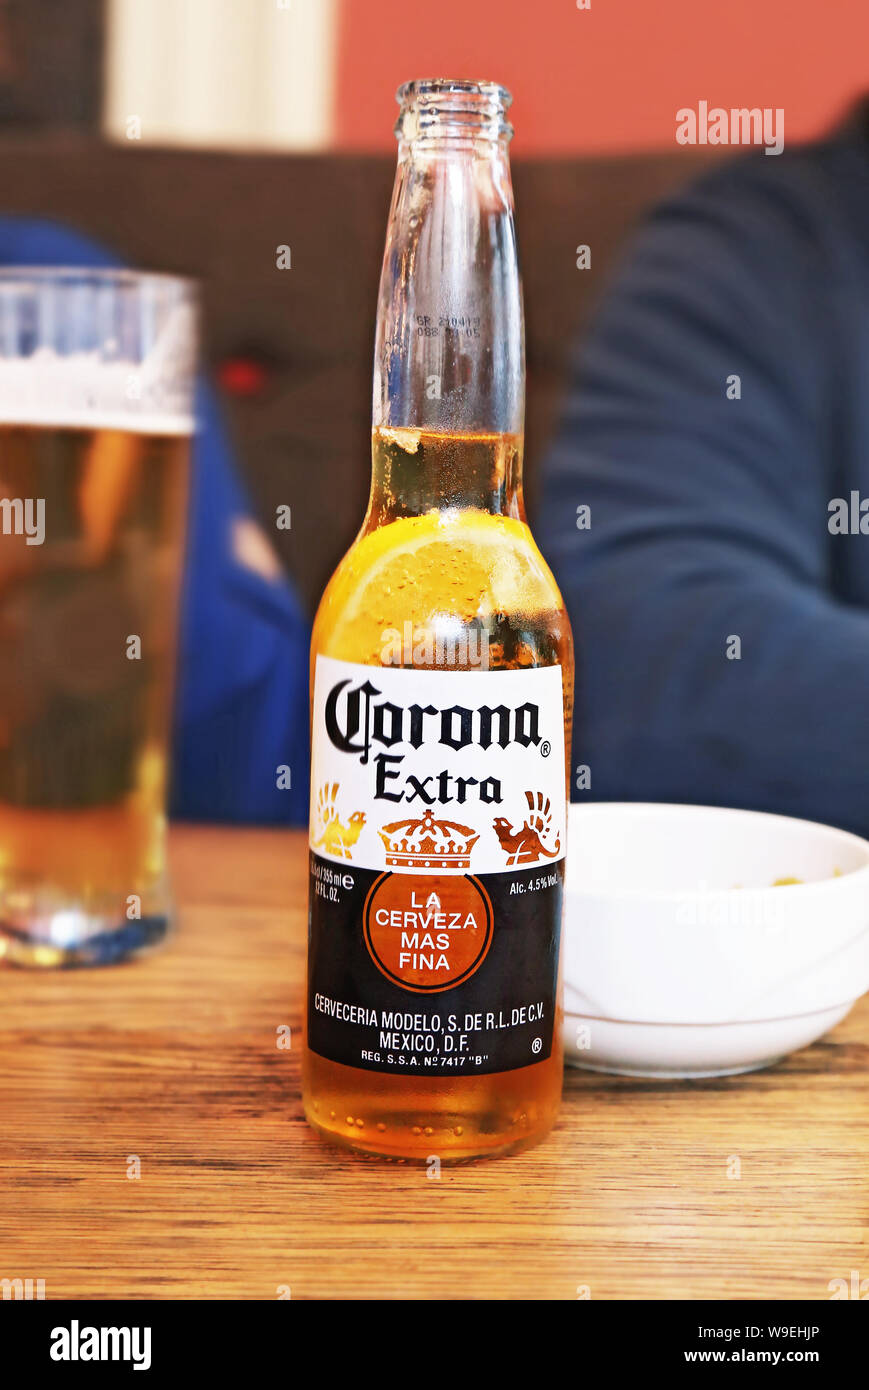 Corona Beer On A Wooden Table At A Greek Night Bar Stock Photo Alamy